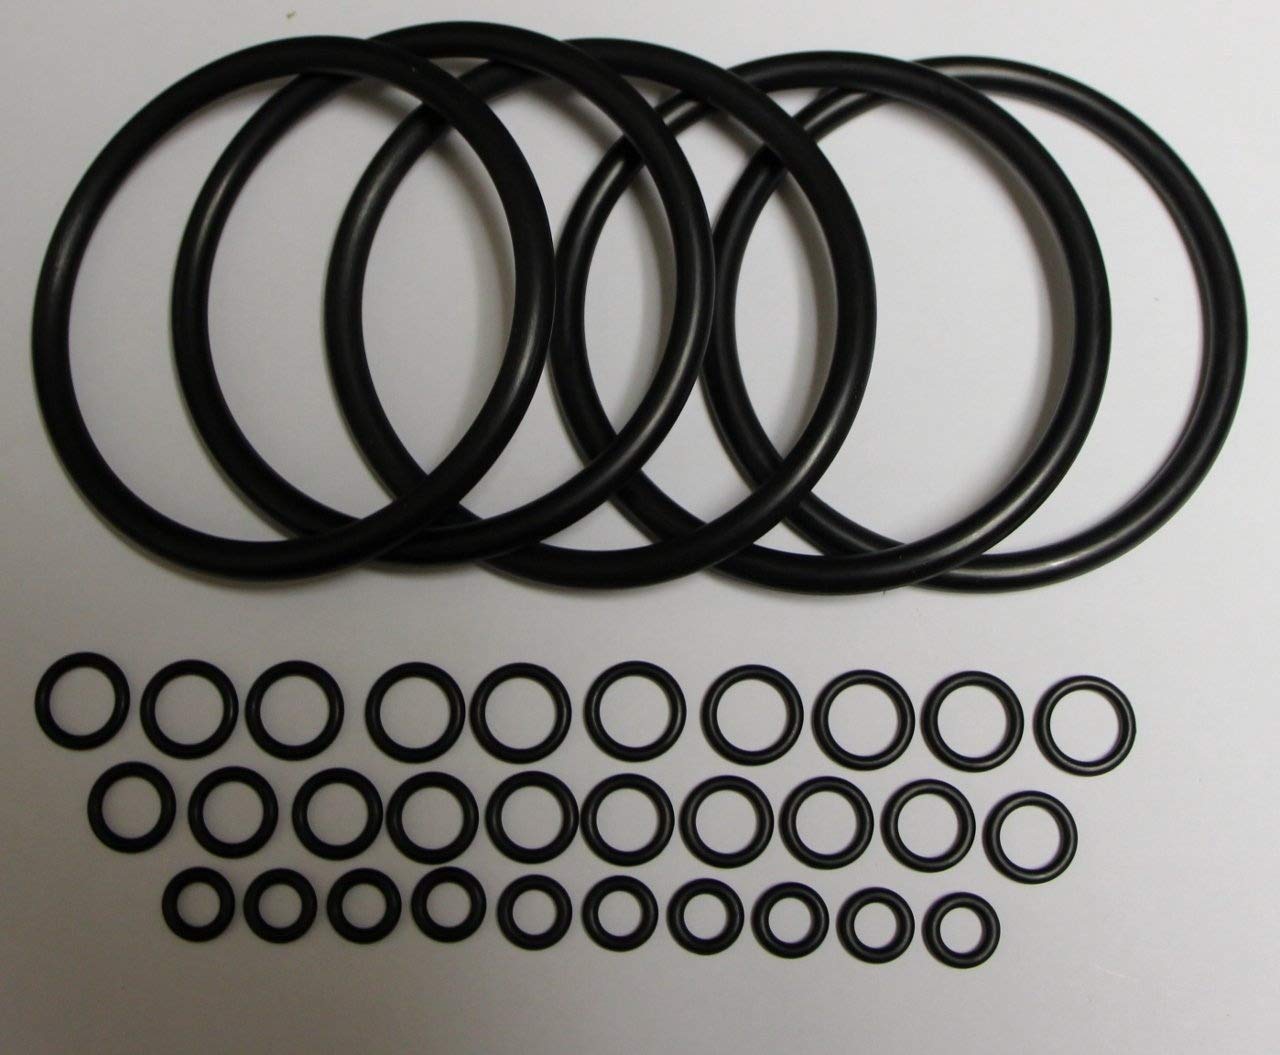 Universal Kegco Type O-Ring Ten Gasket Sets for Cornelius Home Brew Keg and Homebrewed With Pride keg sticker